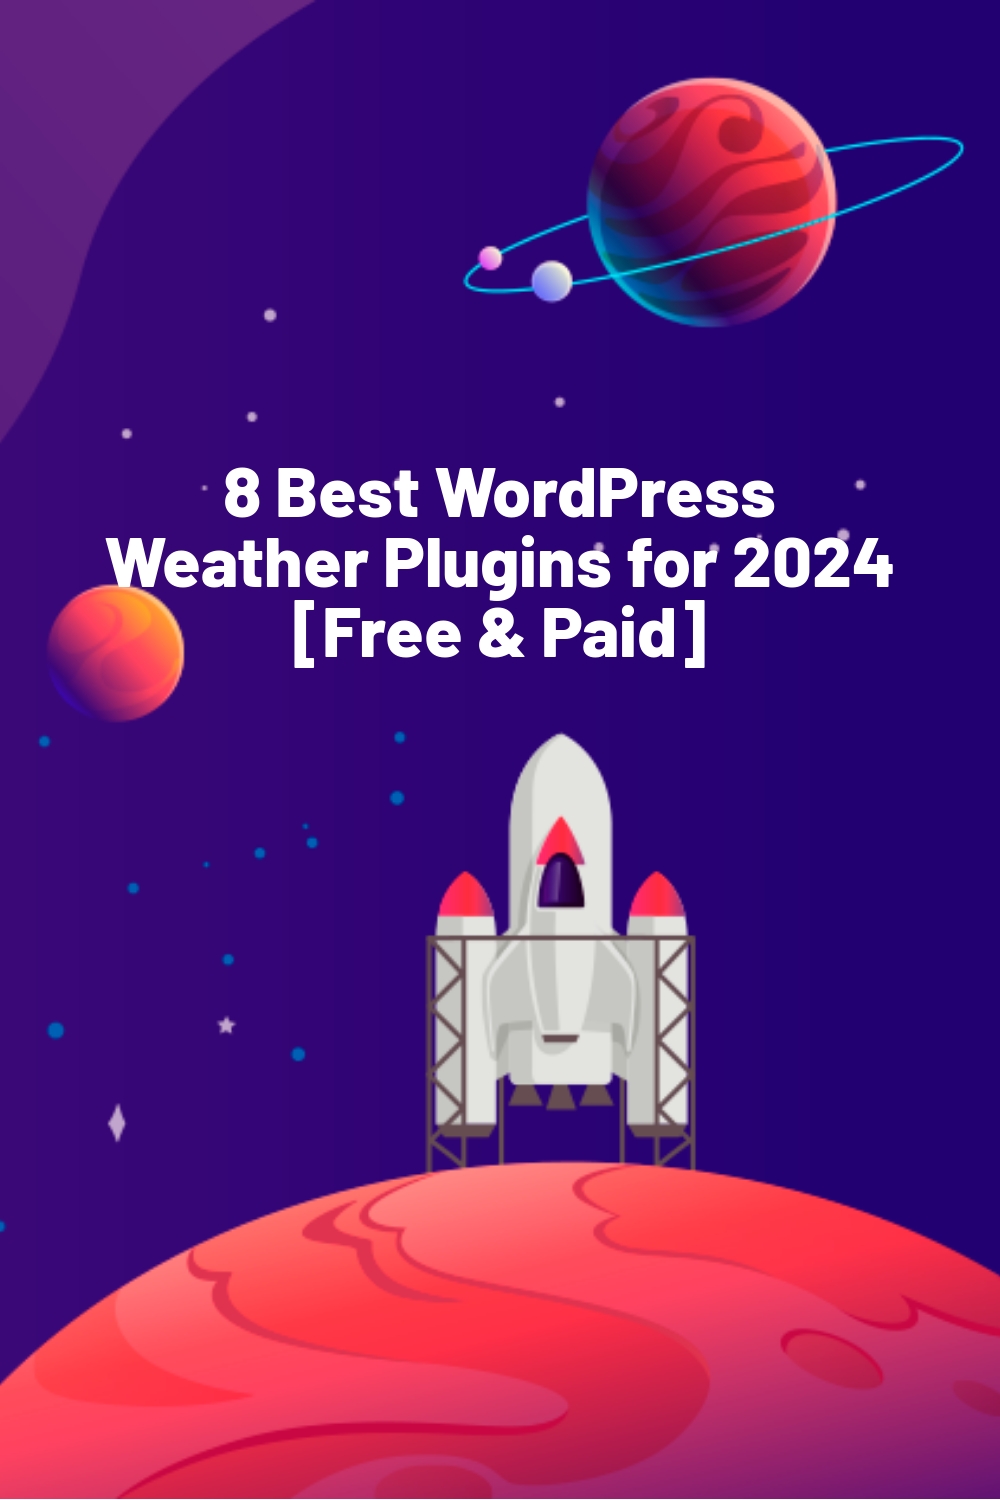 8 Best WordPress Weather Plugins for 2024 [Free & Paid]